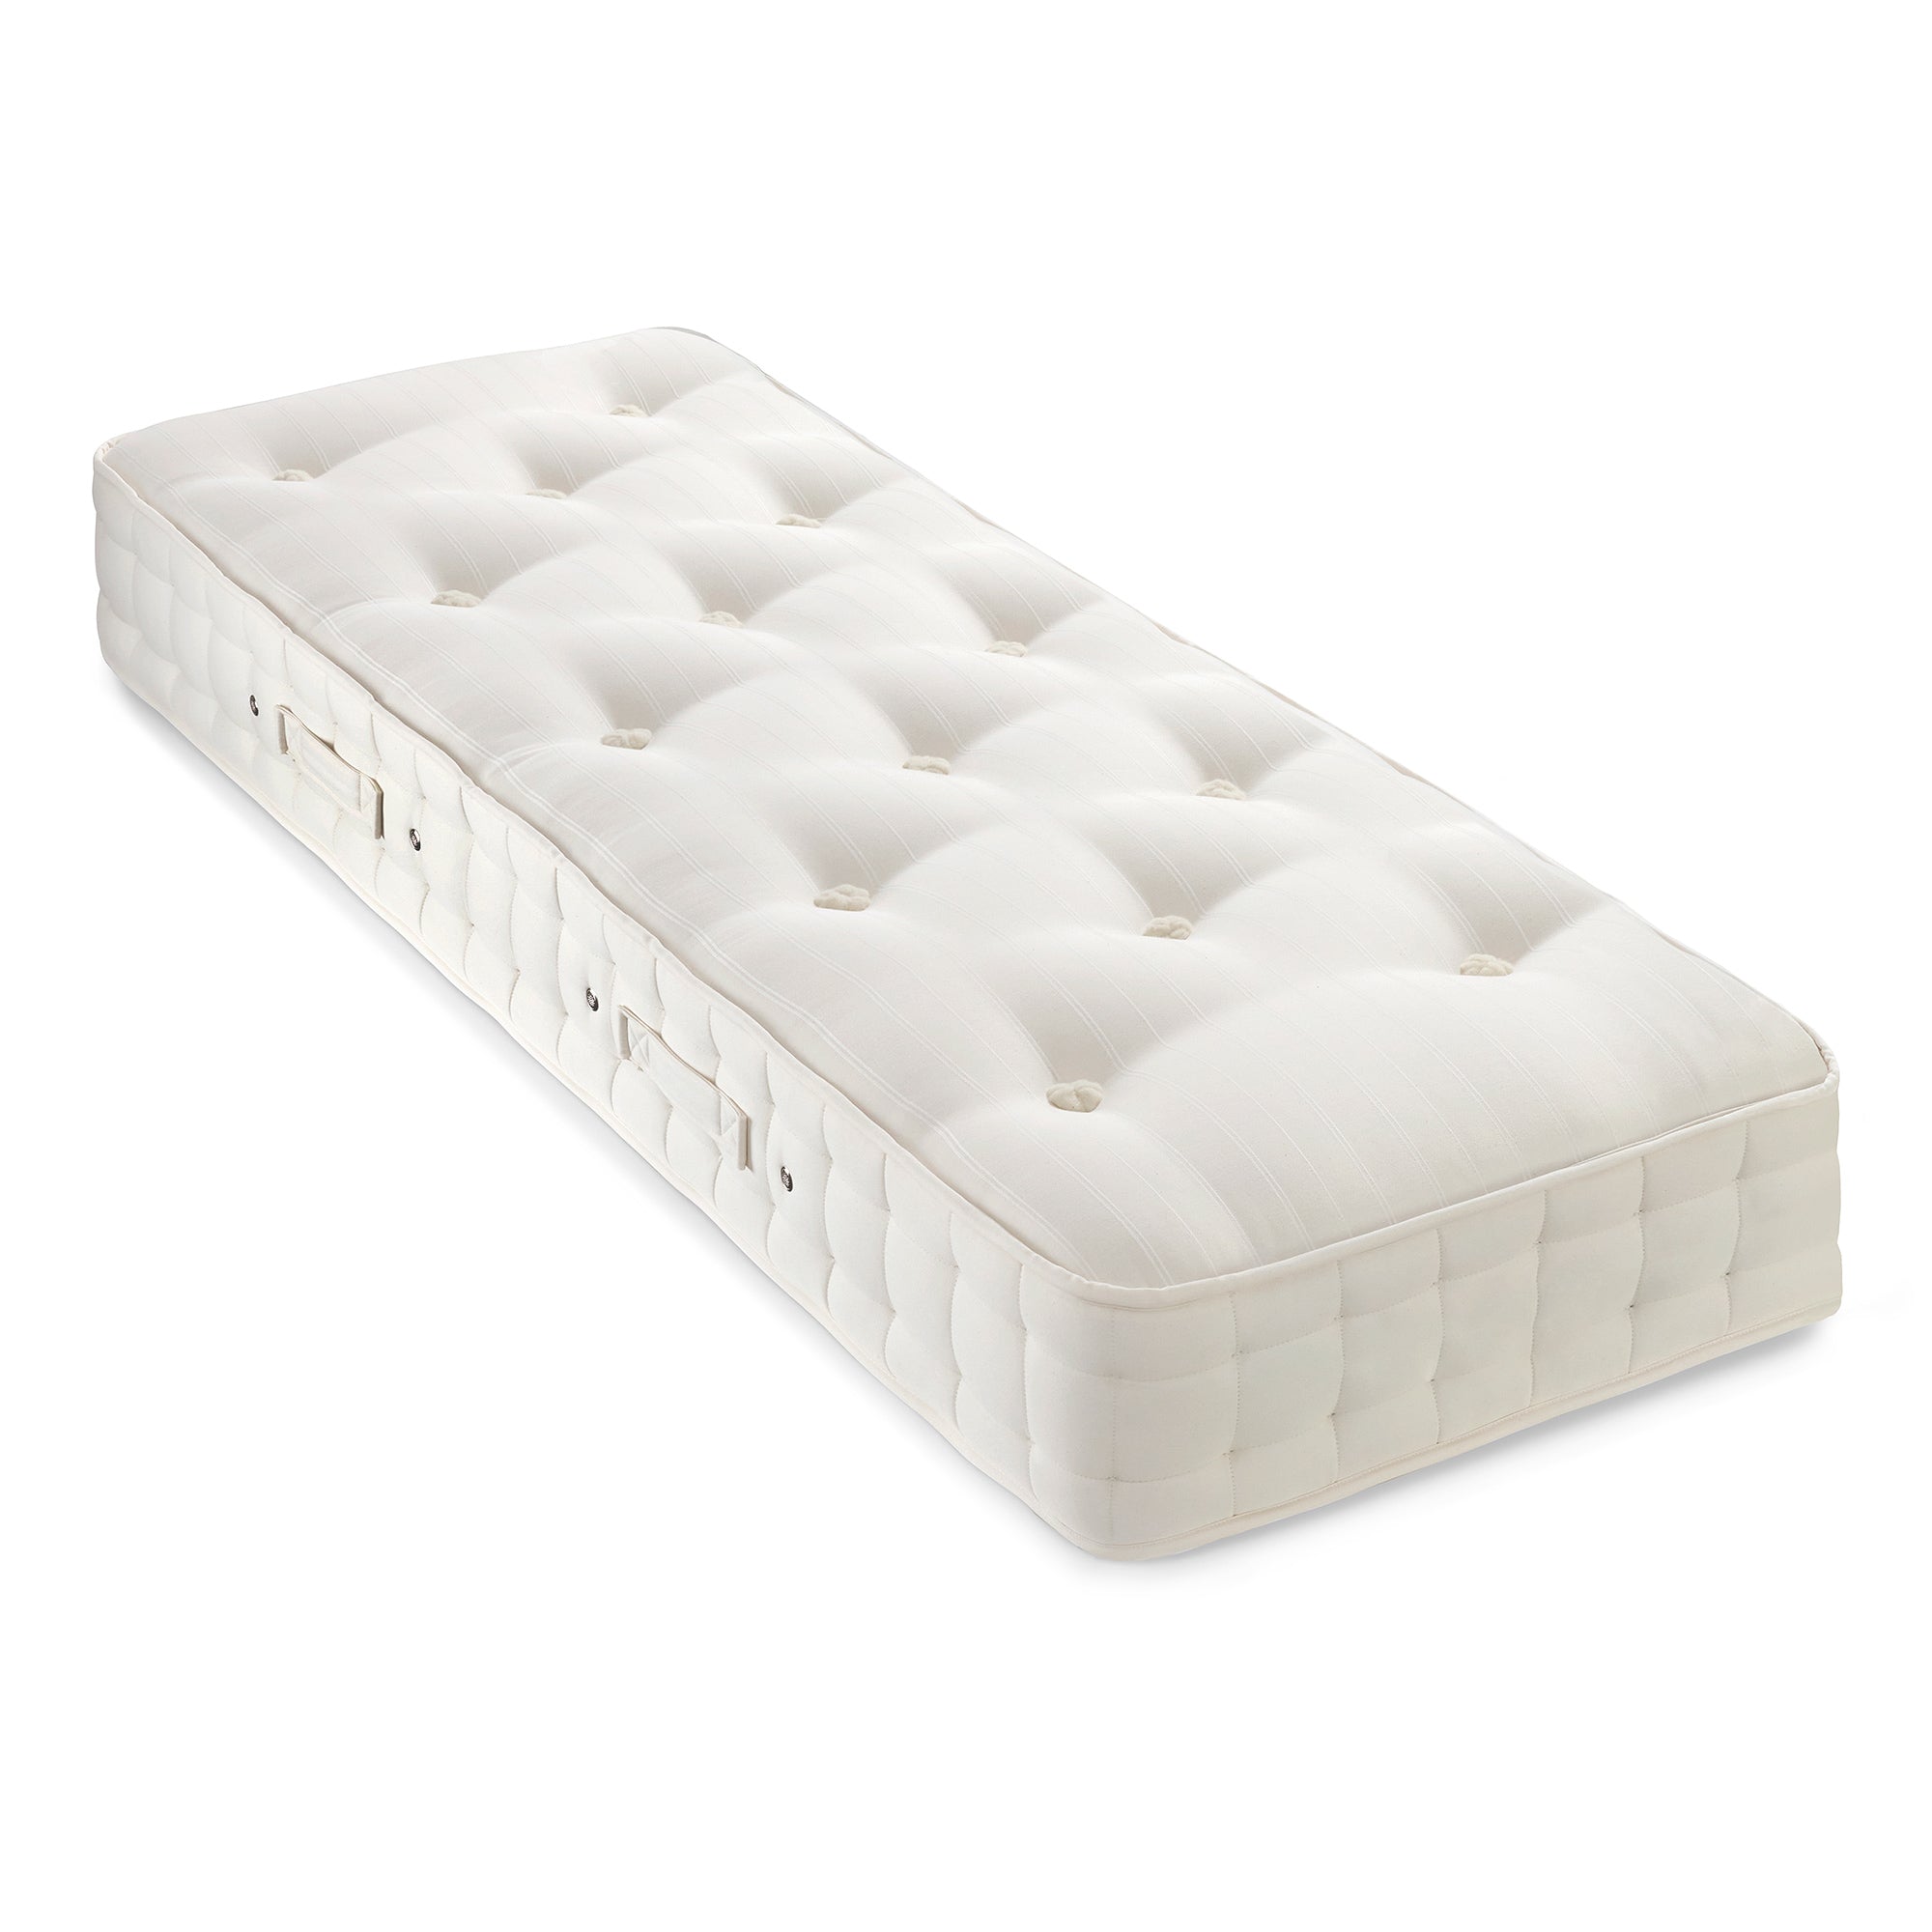 Hypnos Orthocare Classic - Mattress Single (90cm) In Firm Tension